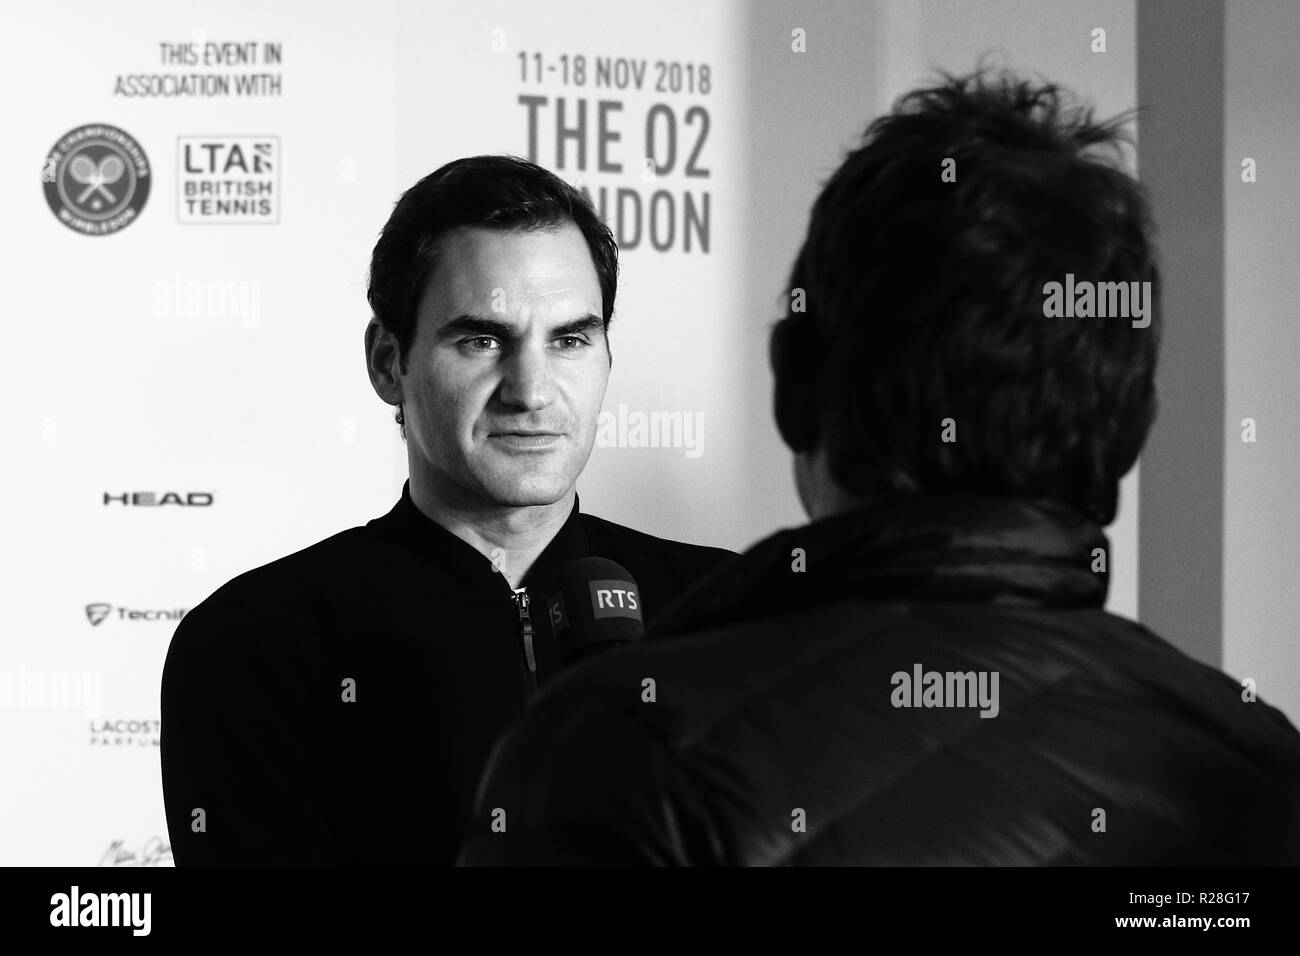 LONDON, ENGLAND - NOVEMBER 17: Roger Federer of Switzerland giving media interviews after his defeat against Alexander Zverev of Germany during the ATP World Tour Finals at the O2 Arena on November 17, 2018 in London, England. Photo by Paul Cunningham Credit: Paul Cunningham/Alamy Live News Stock Photo